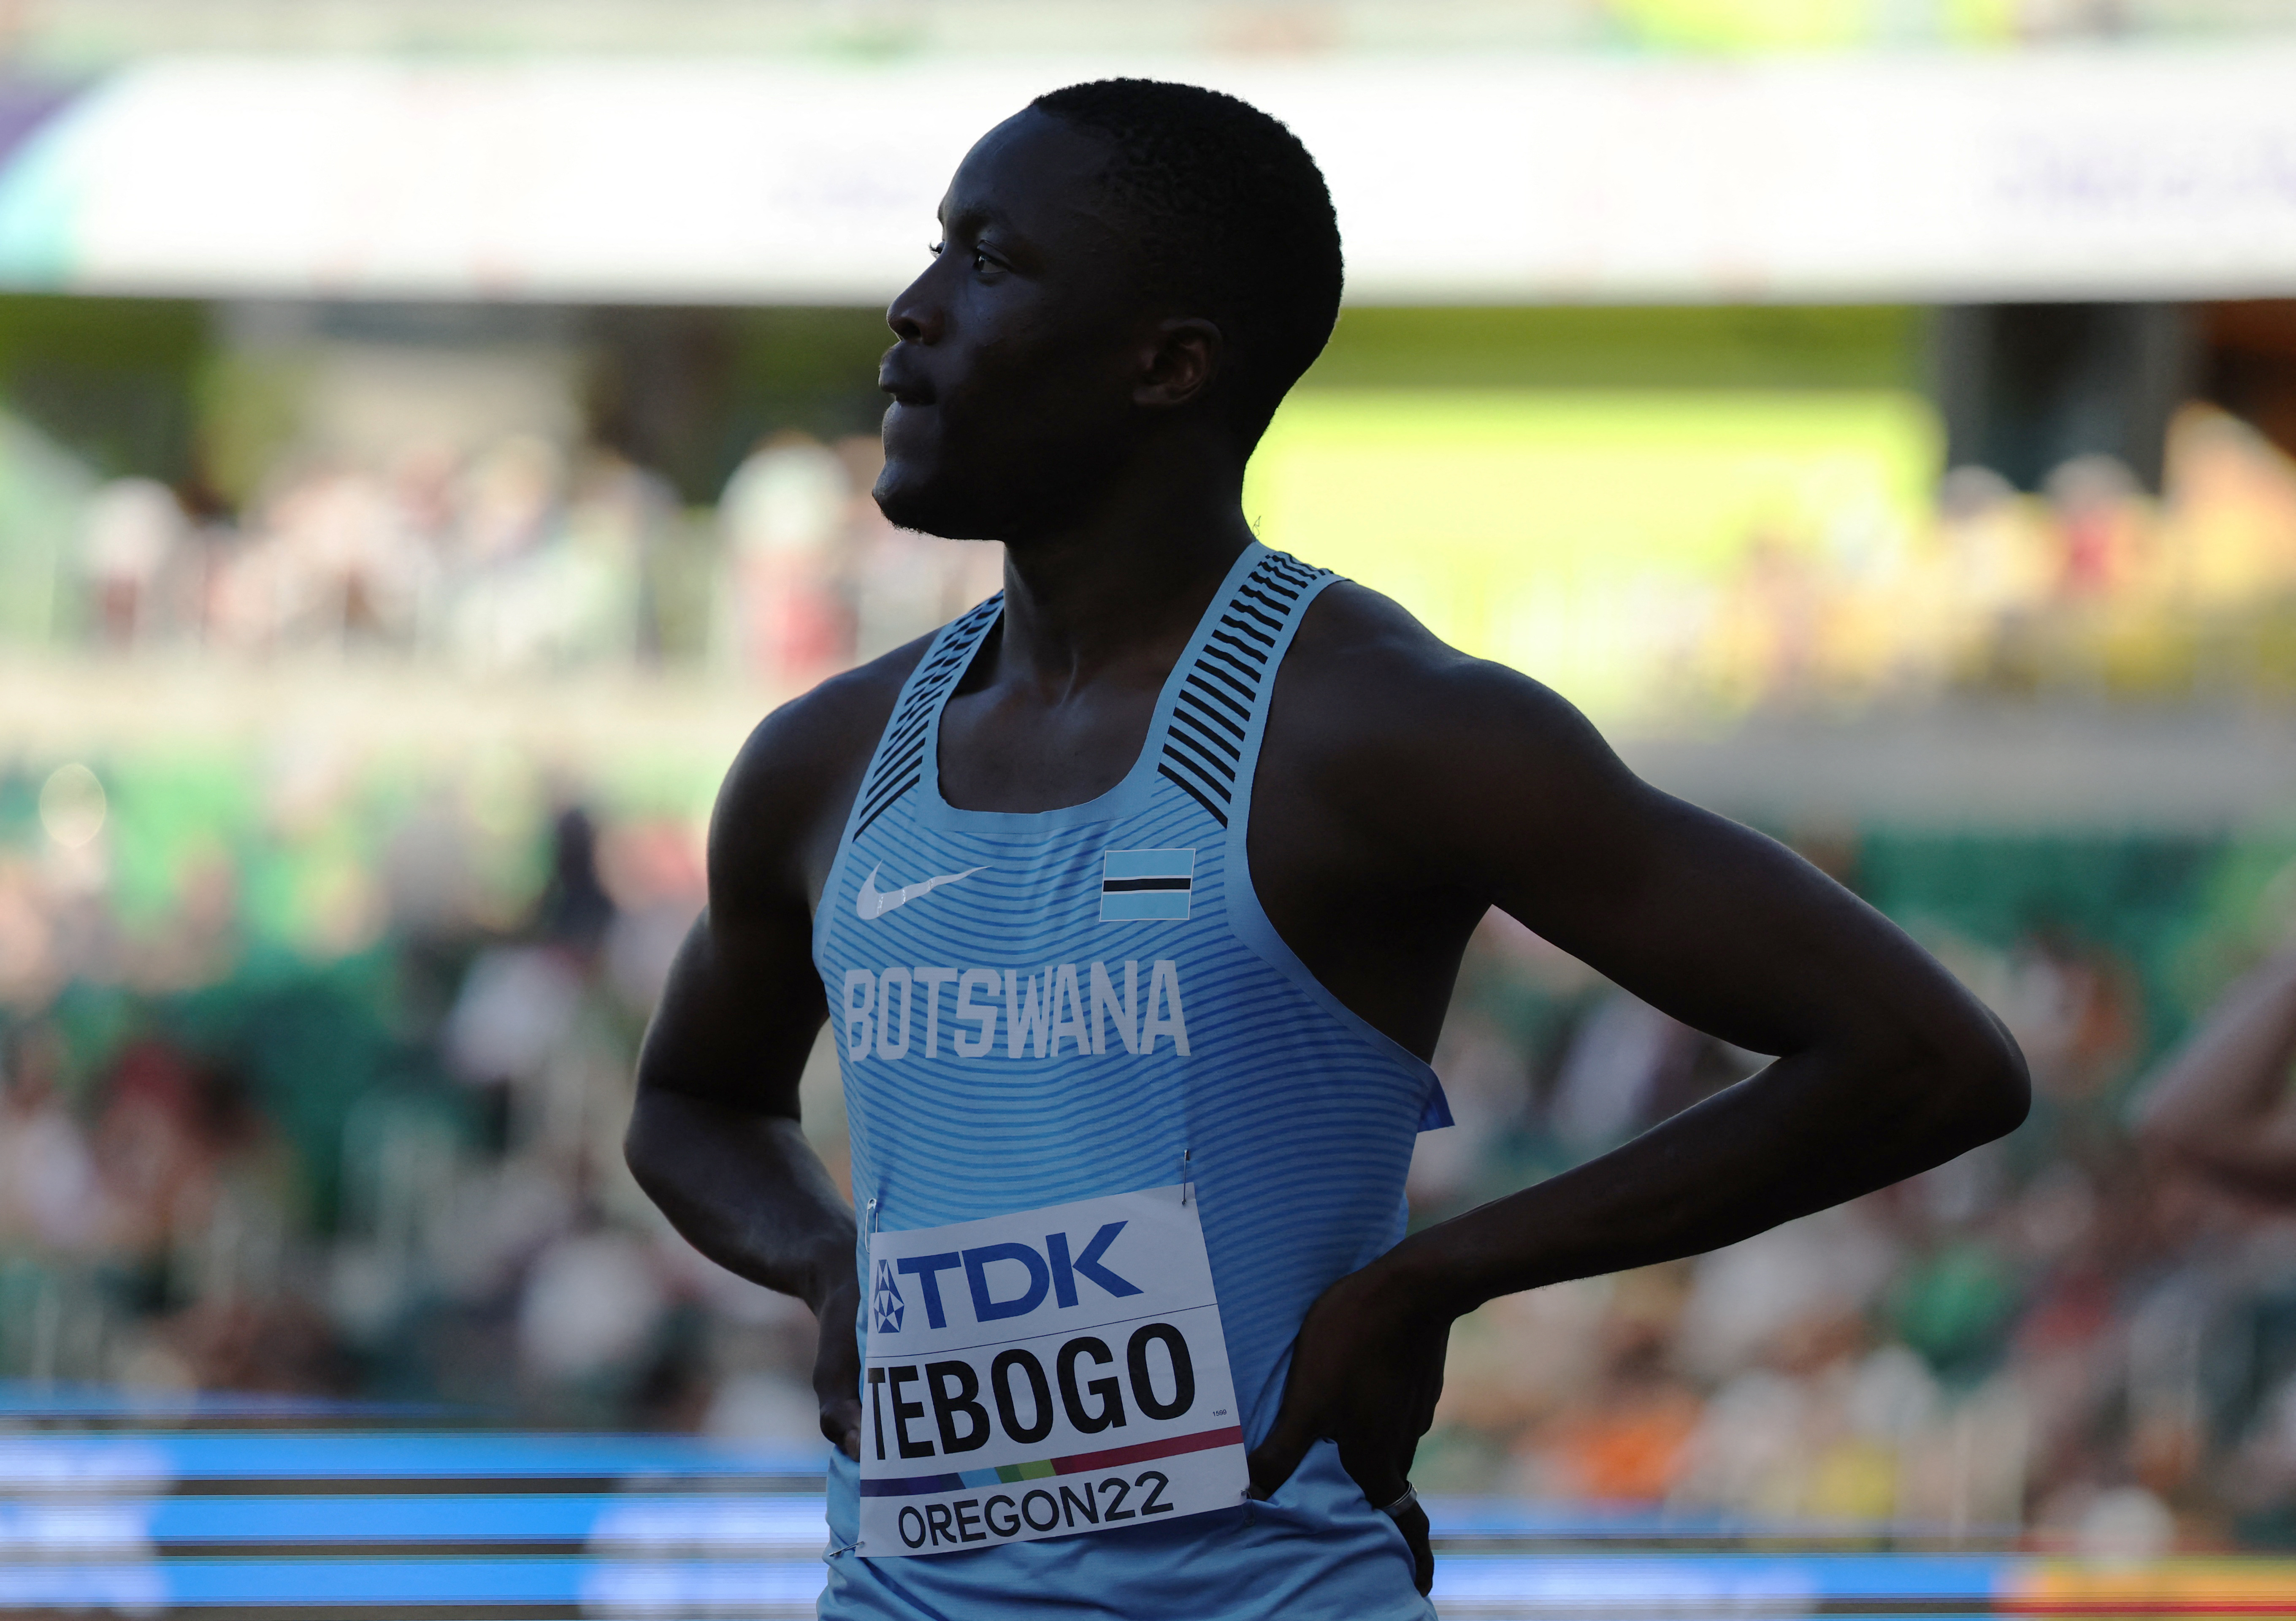 Tebogo has just competed in the World Senior Athletics Championships (REUTERS/Lucy Nicholson)